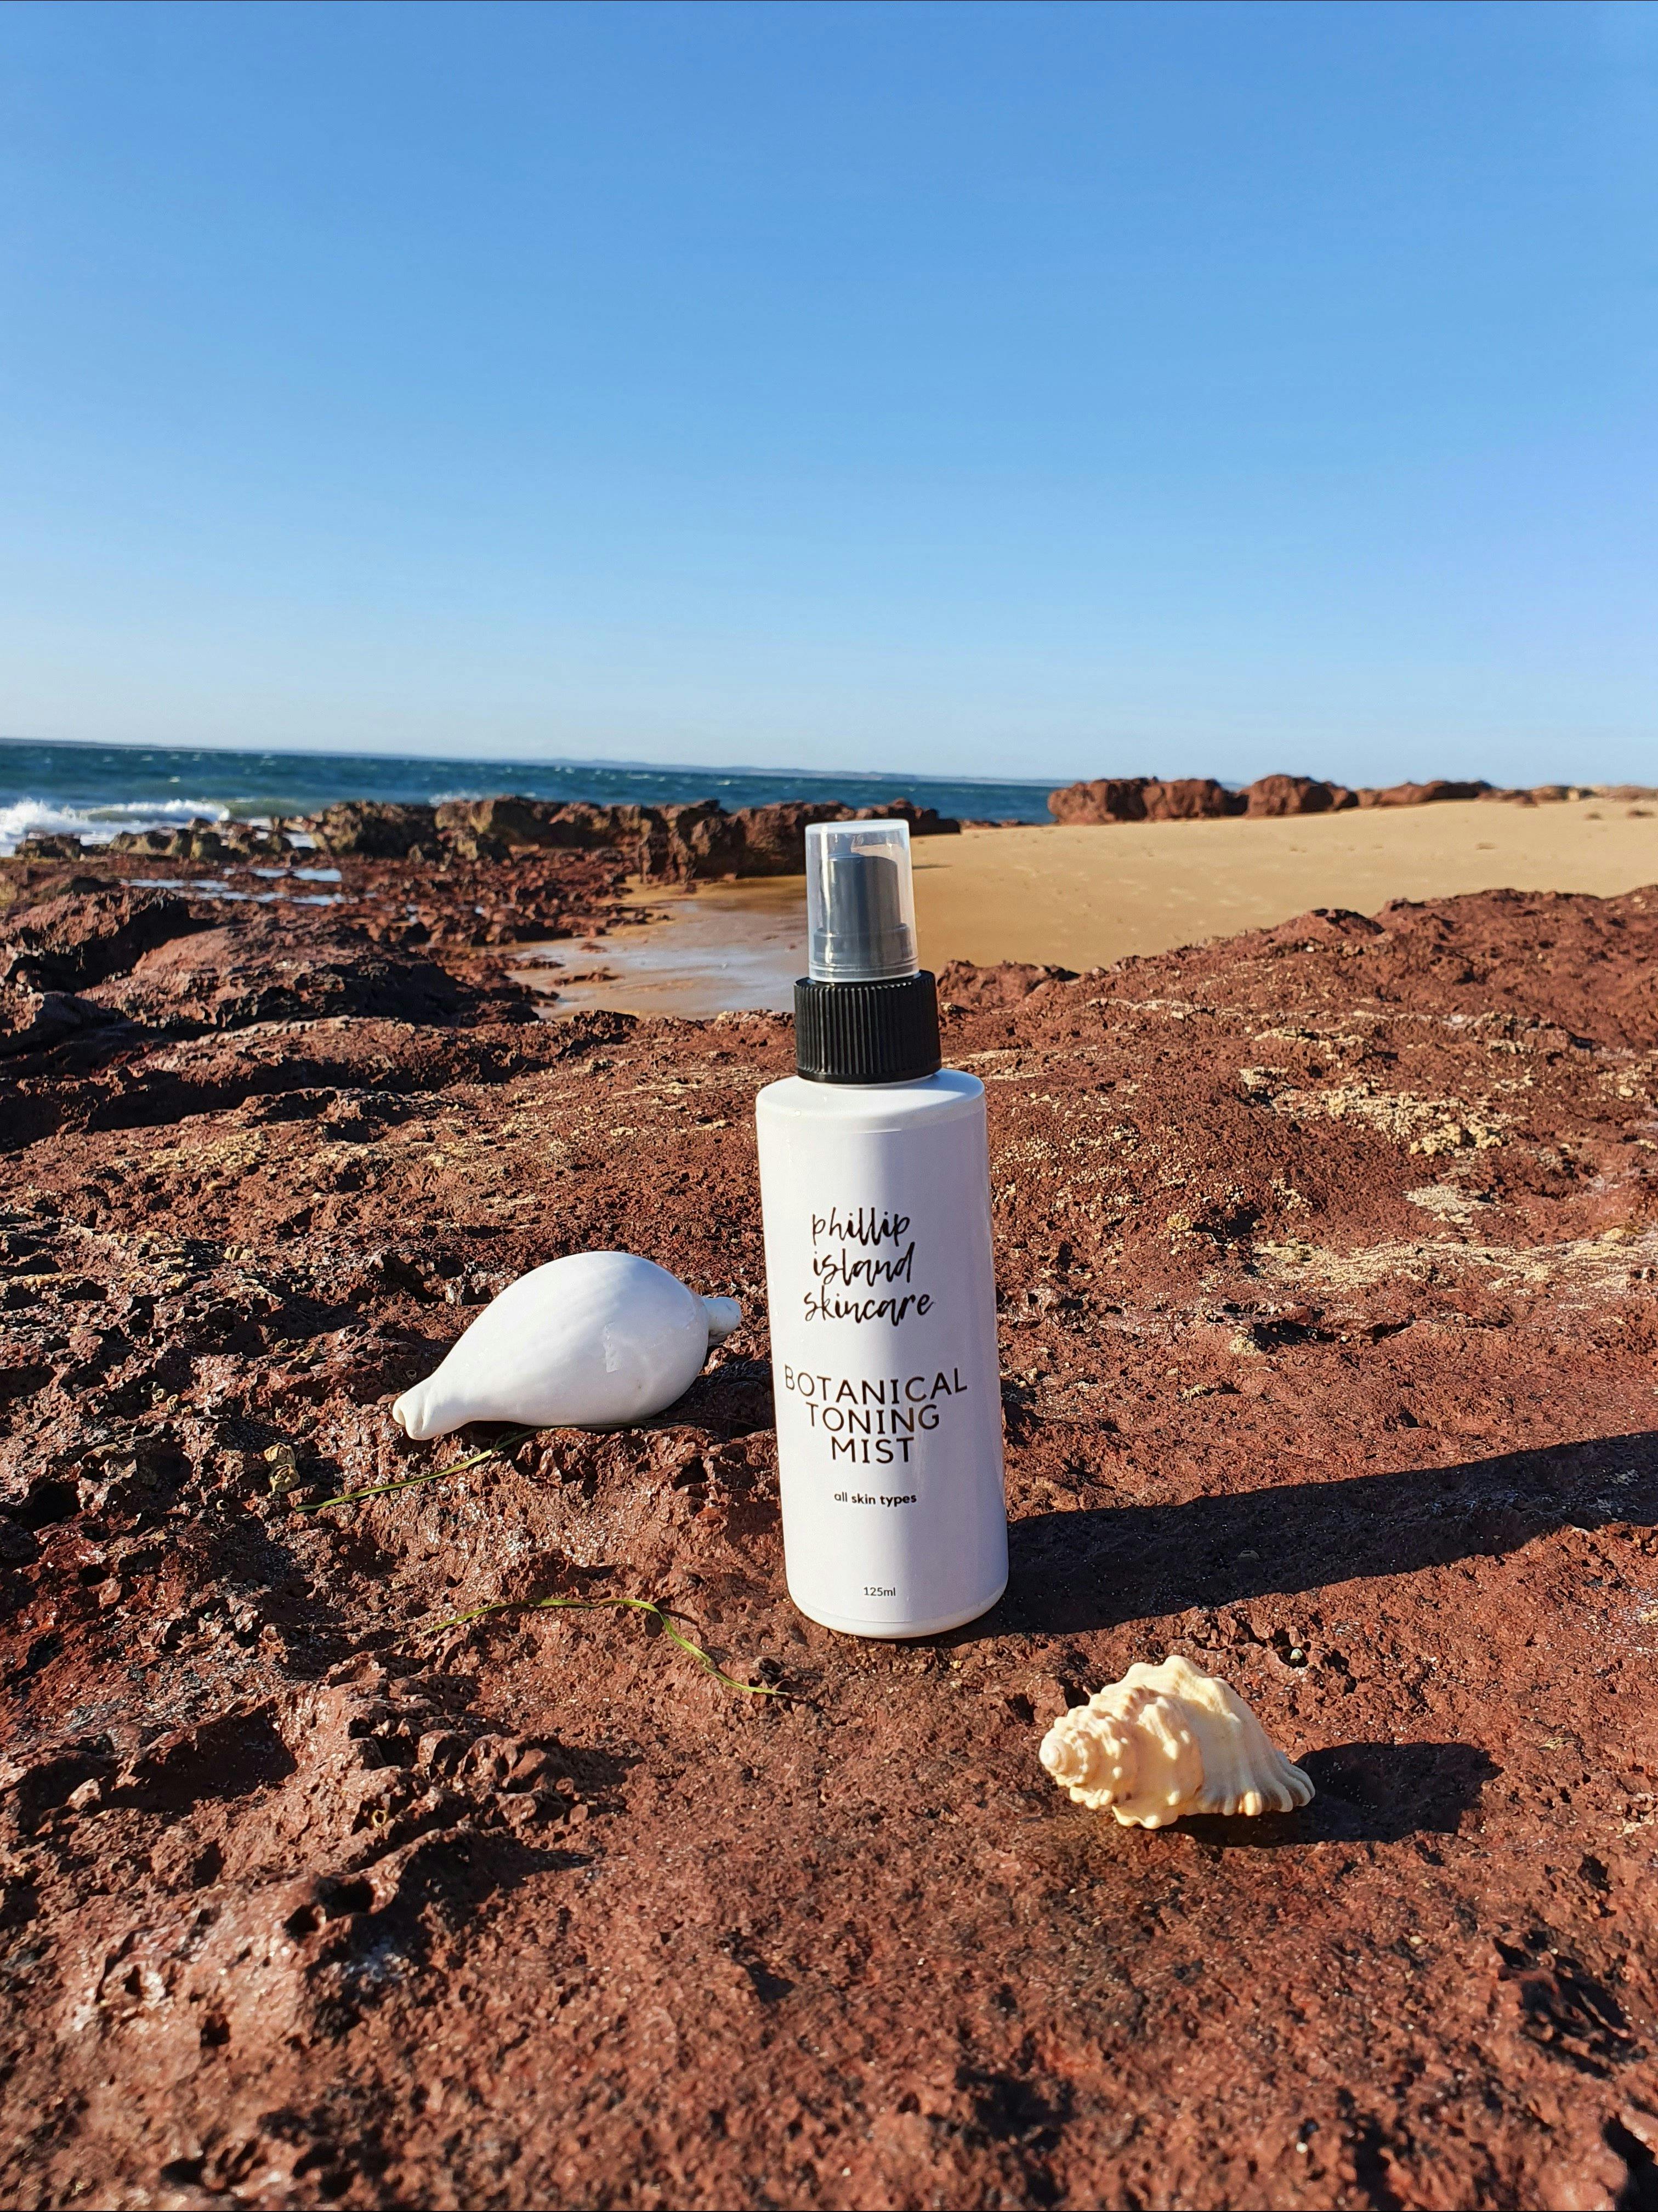 Phillip Island Skincare & Spinal Flow